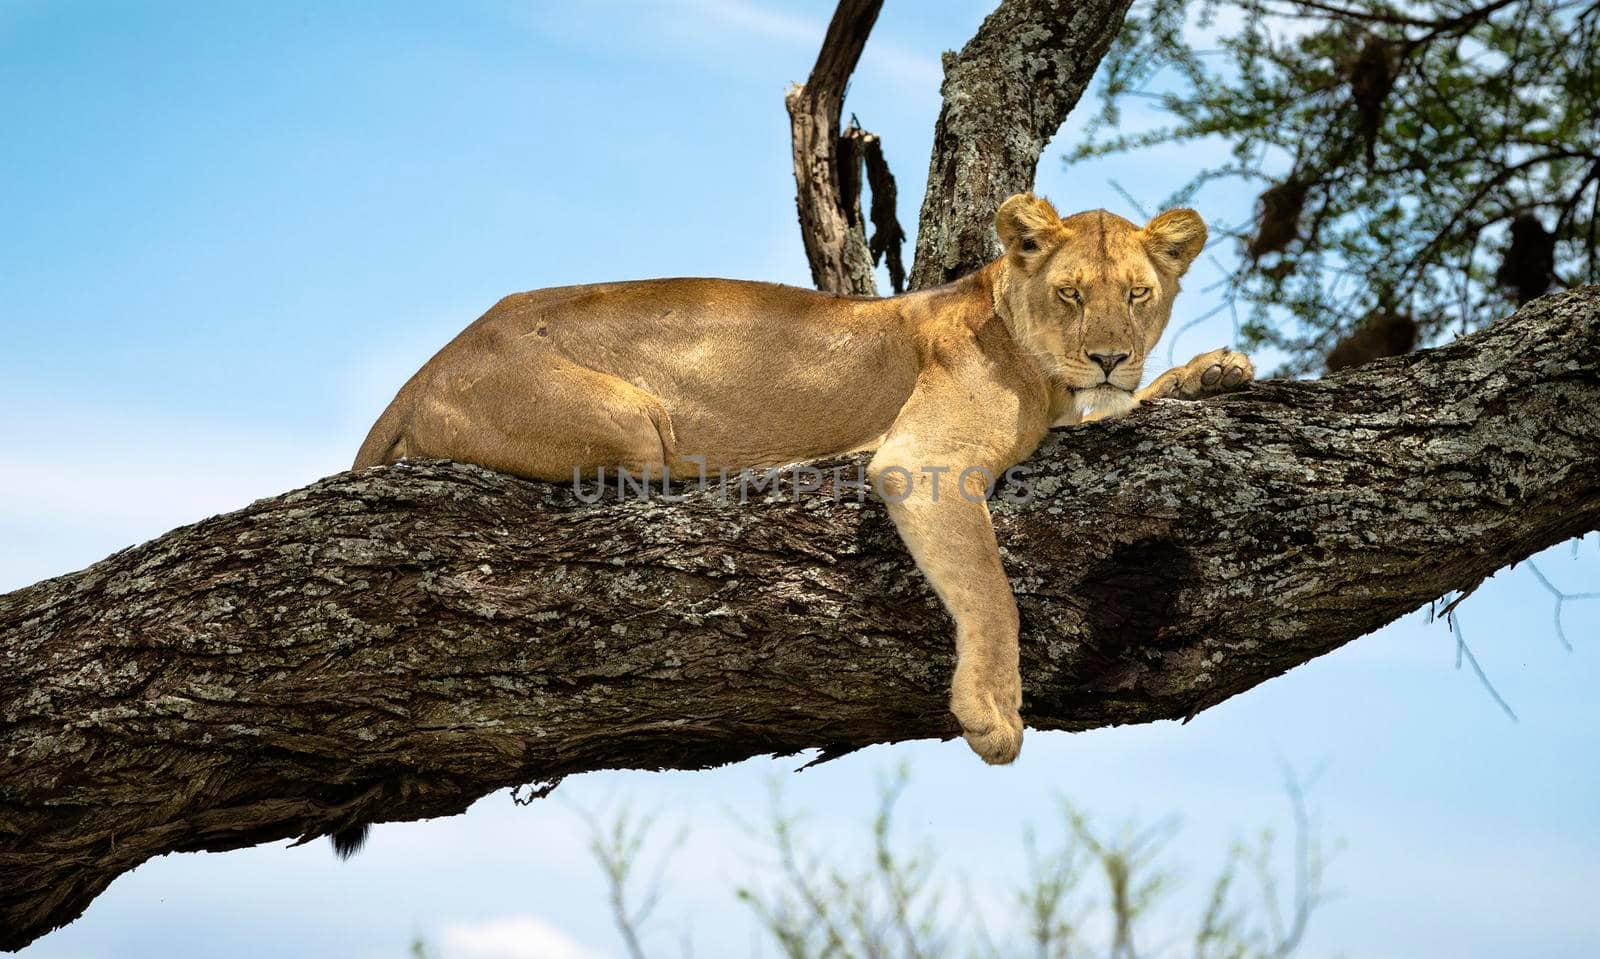 A lioness in the branches of a tree in Africa